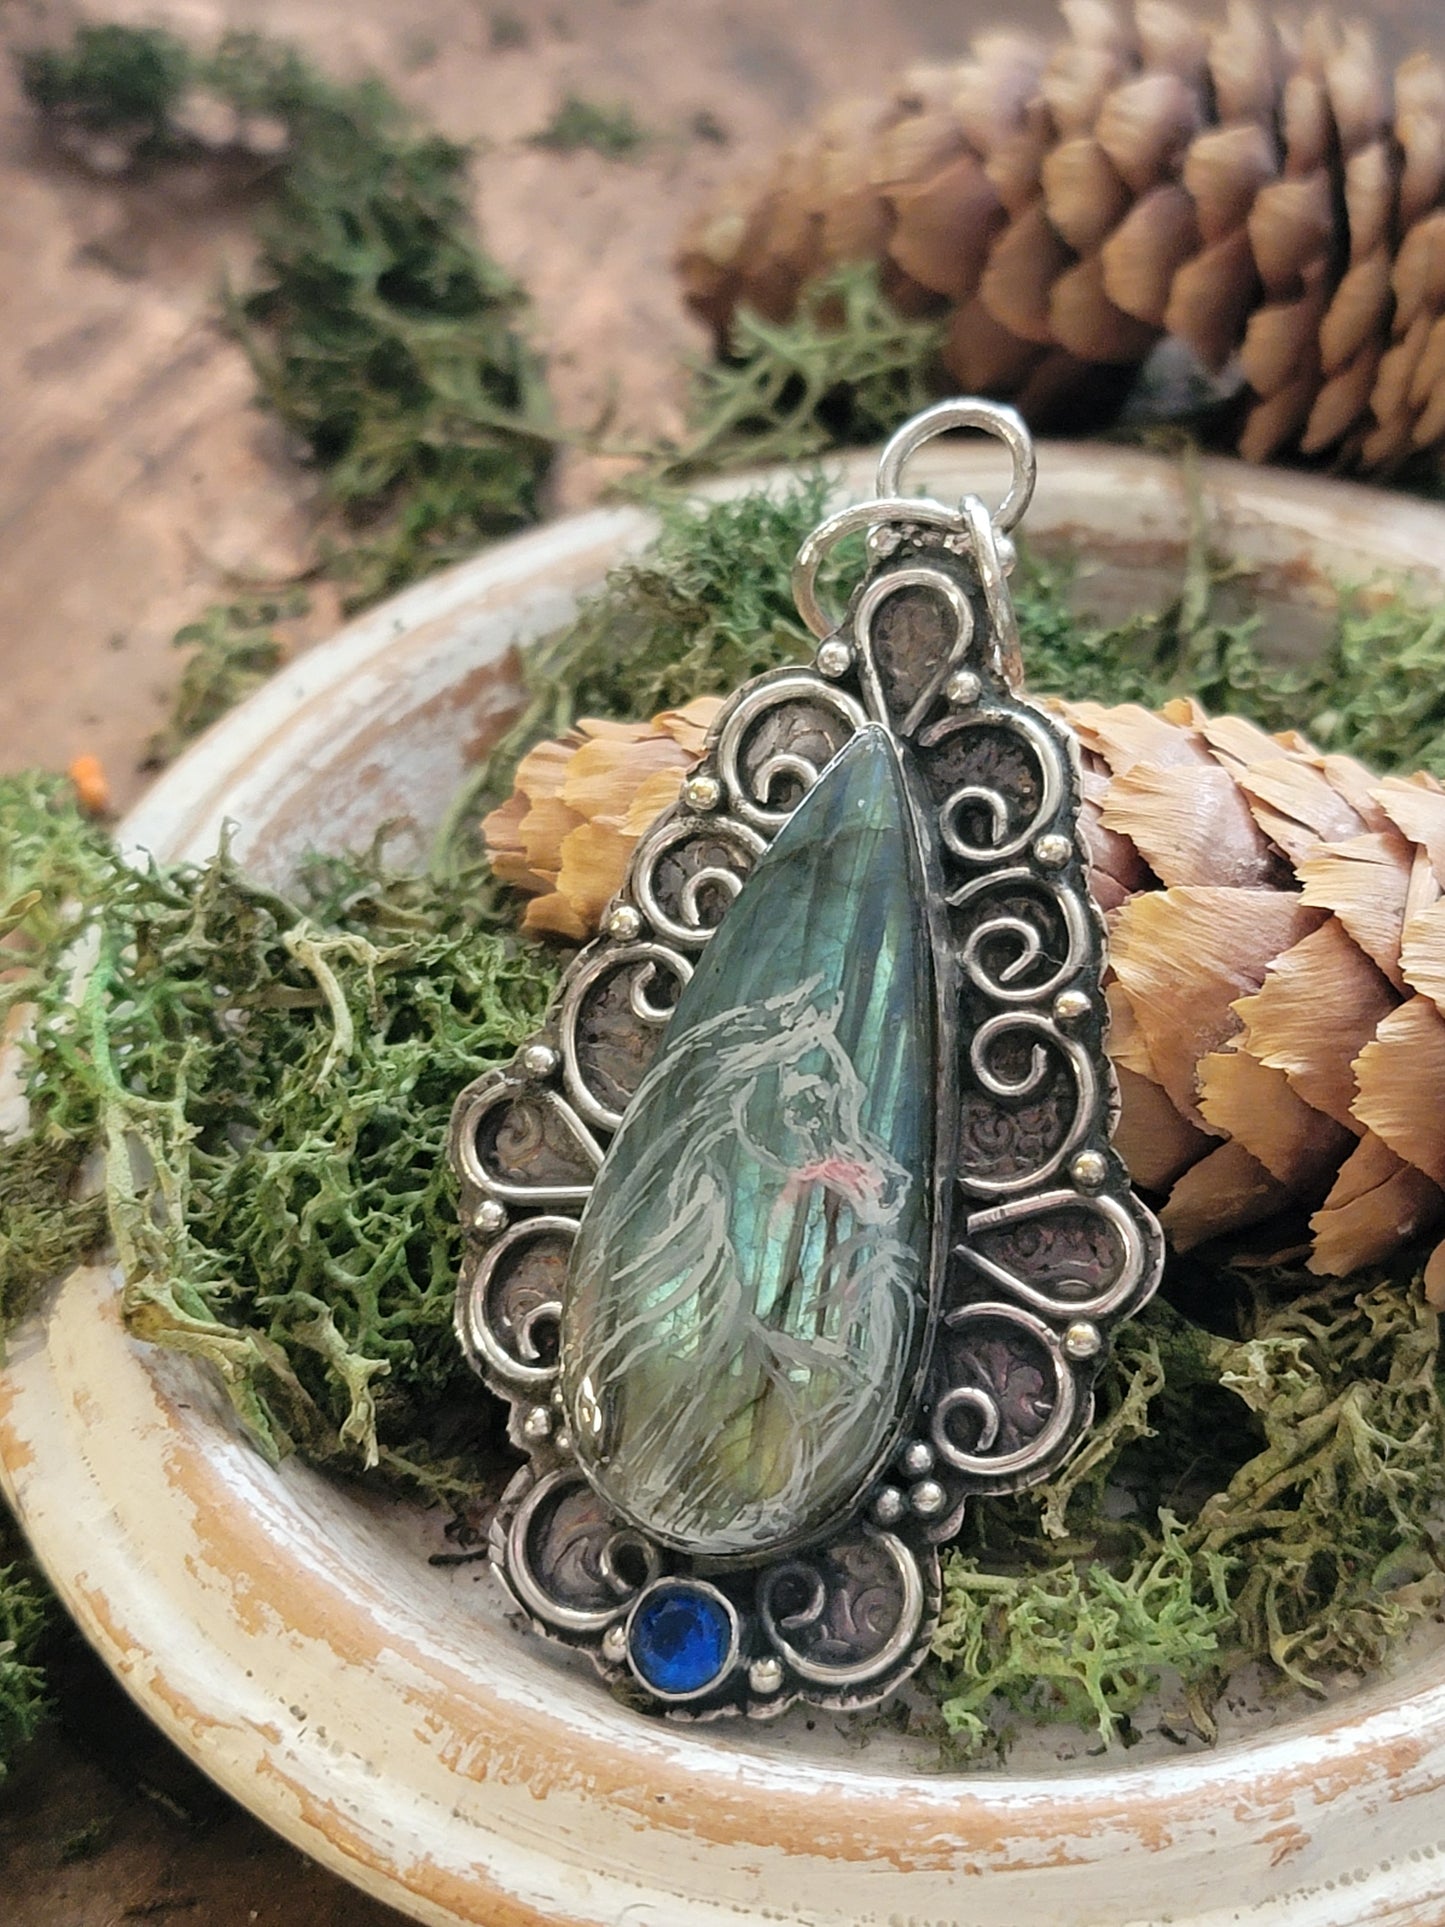 Labrodite pendant with an Arabian horse